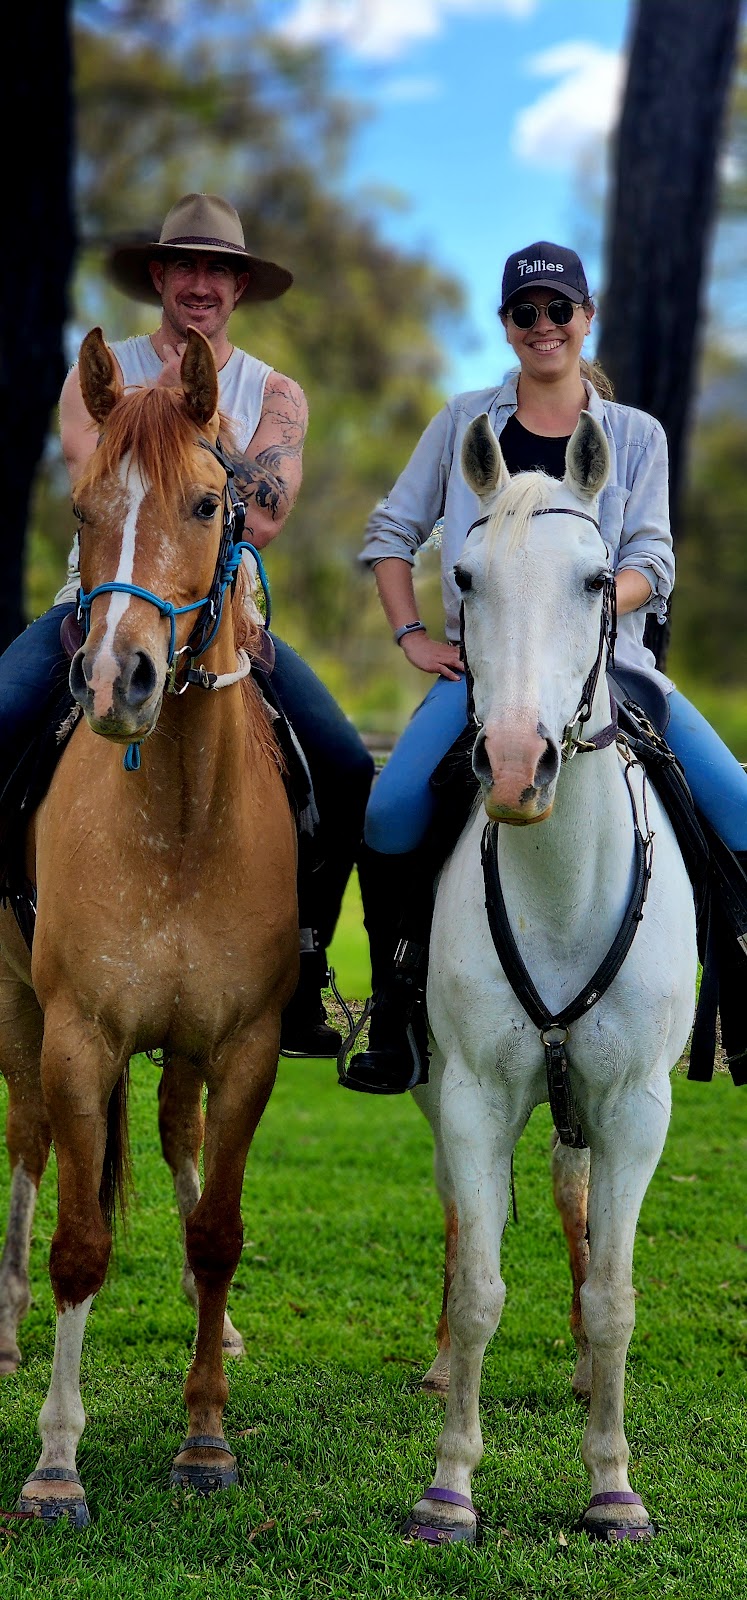 YellowScone Horse Adventures | campground | 97 Petwyn Vale Road, Wingen NSW 2337, Australia | 0417387546 OR +61 417 387 546